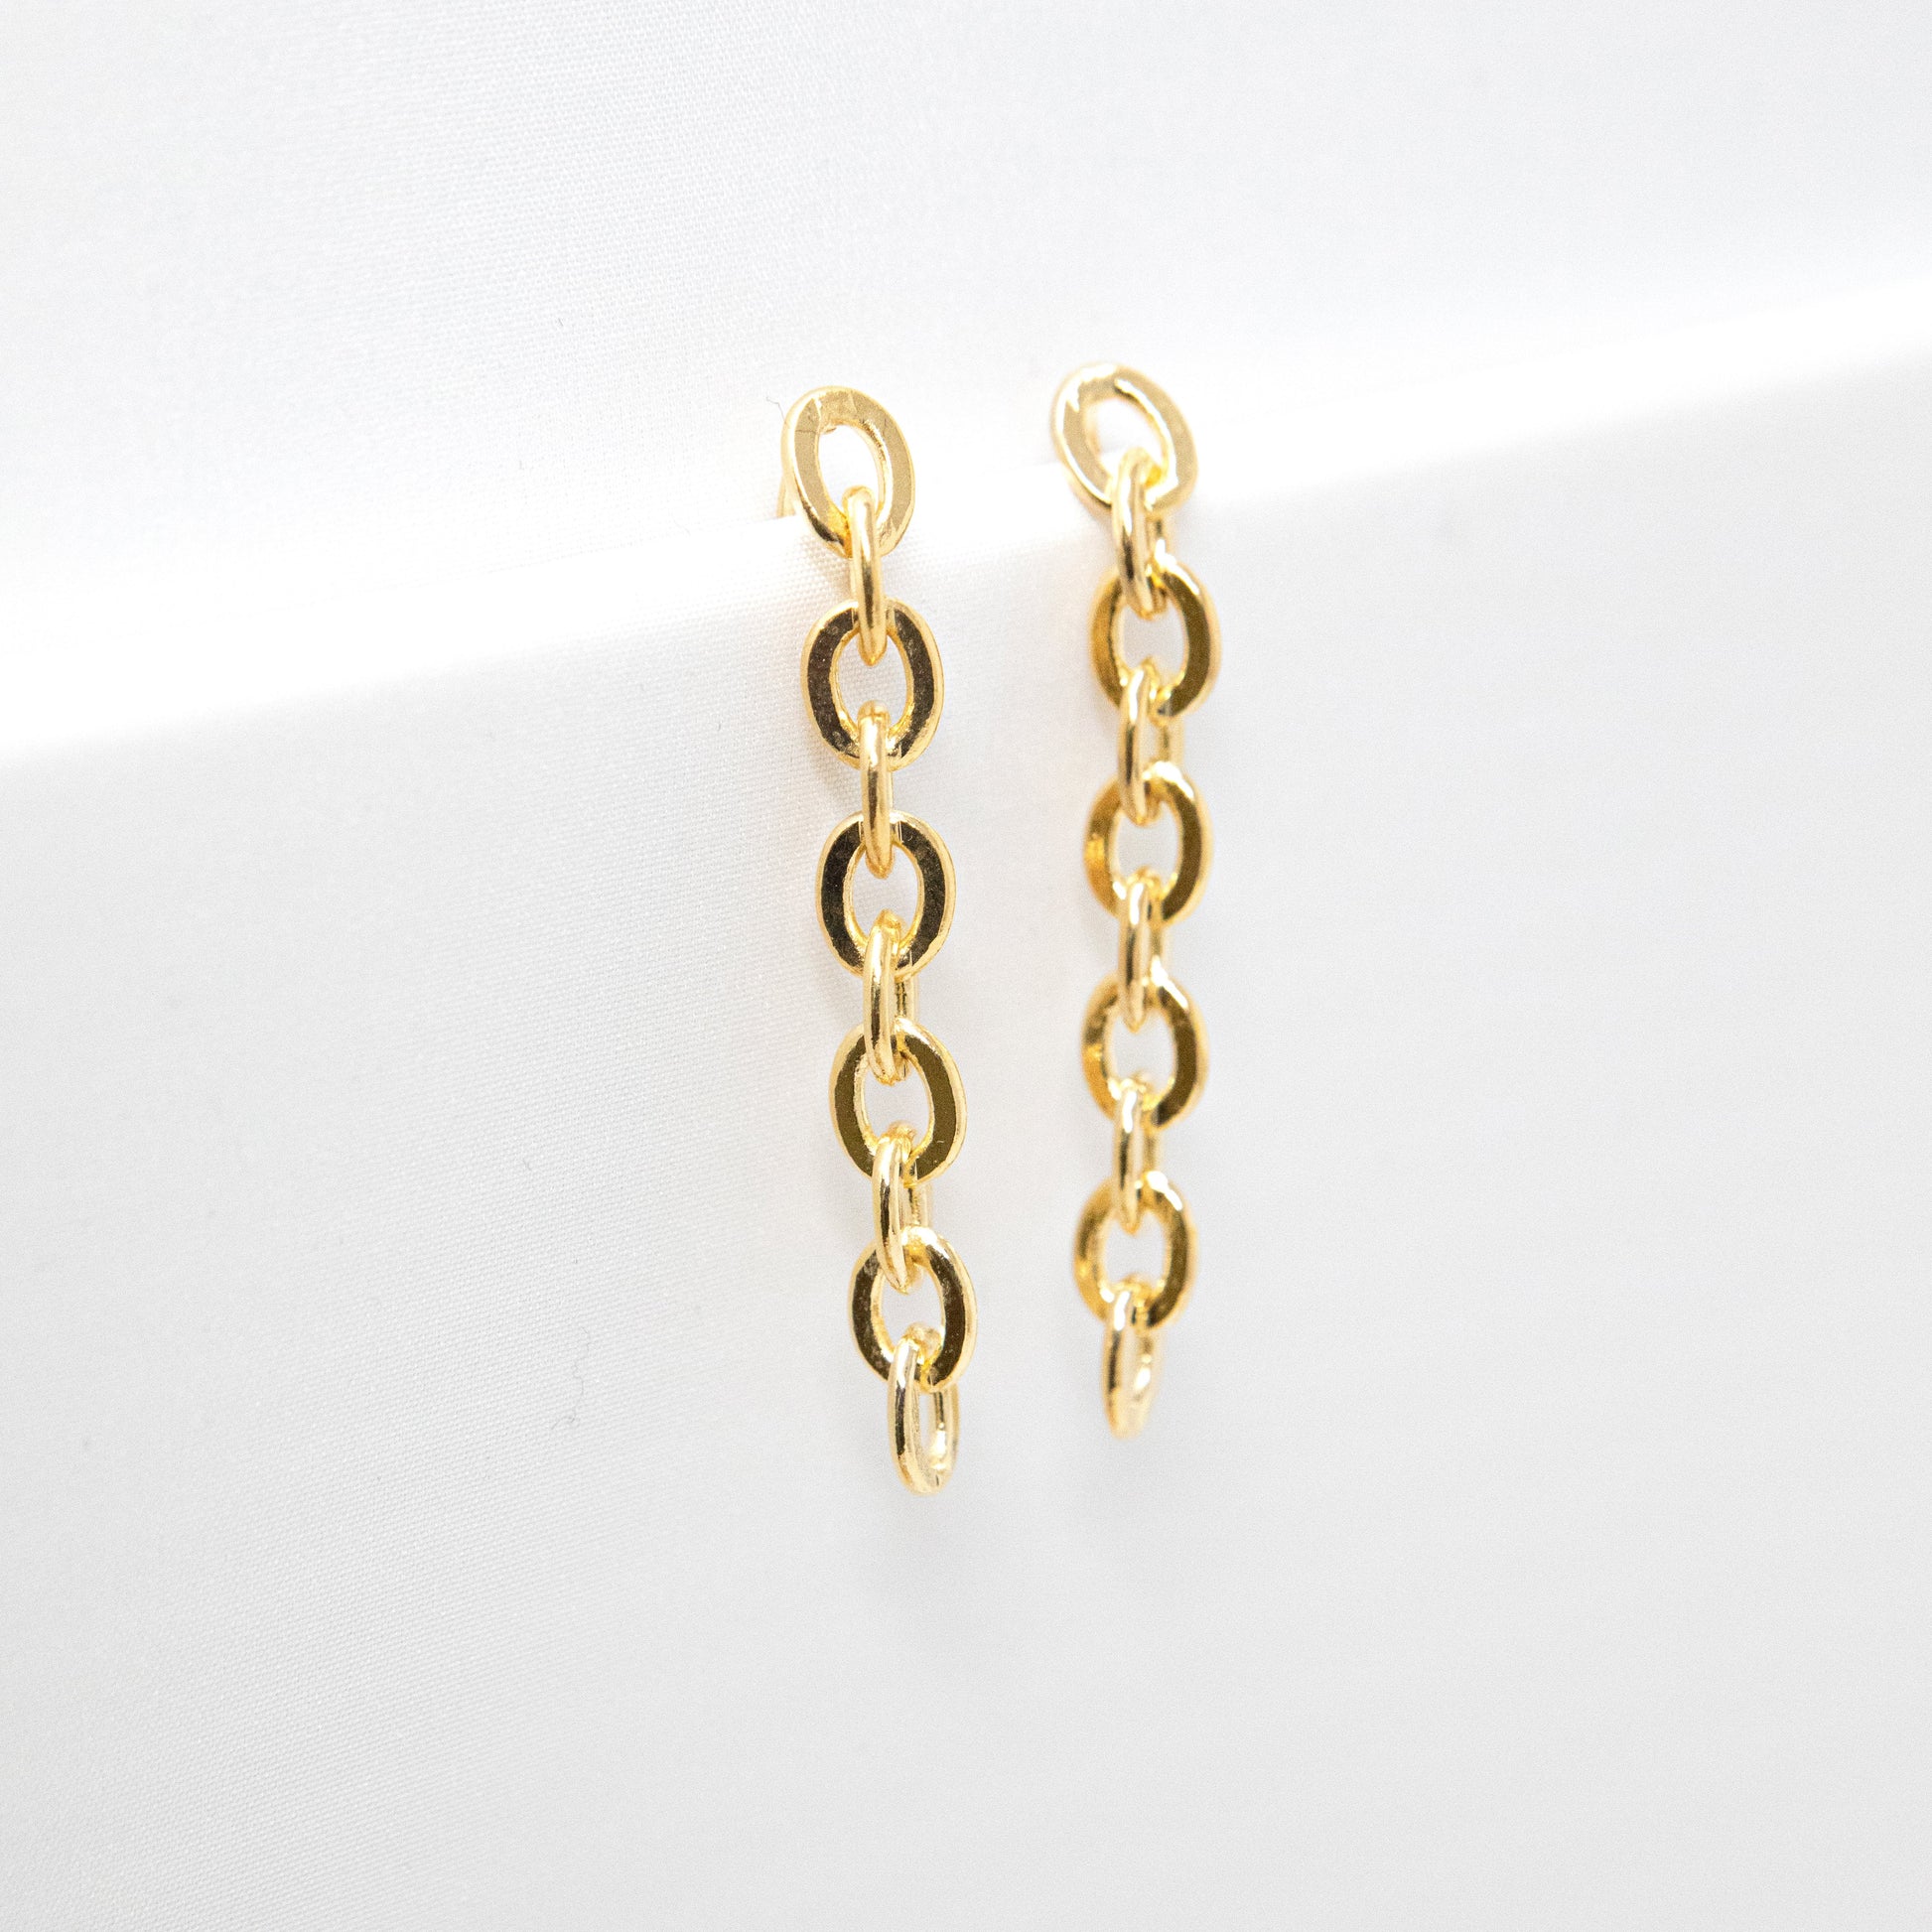 Chain Link Drop Earrings JEWELRY The Sis Kiss Oval Gold